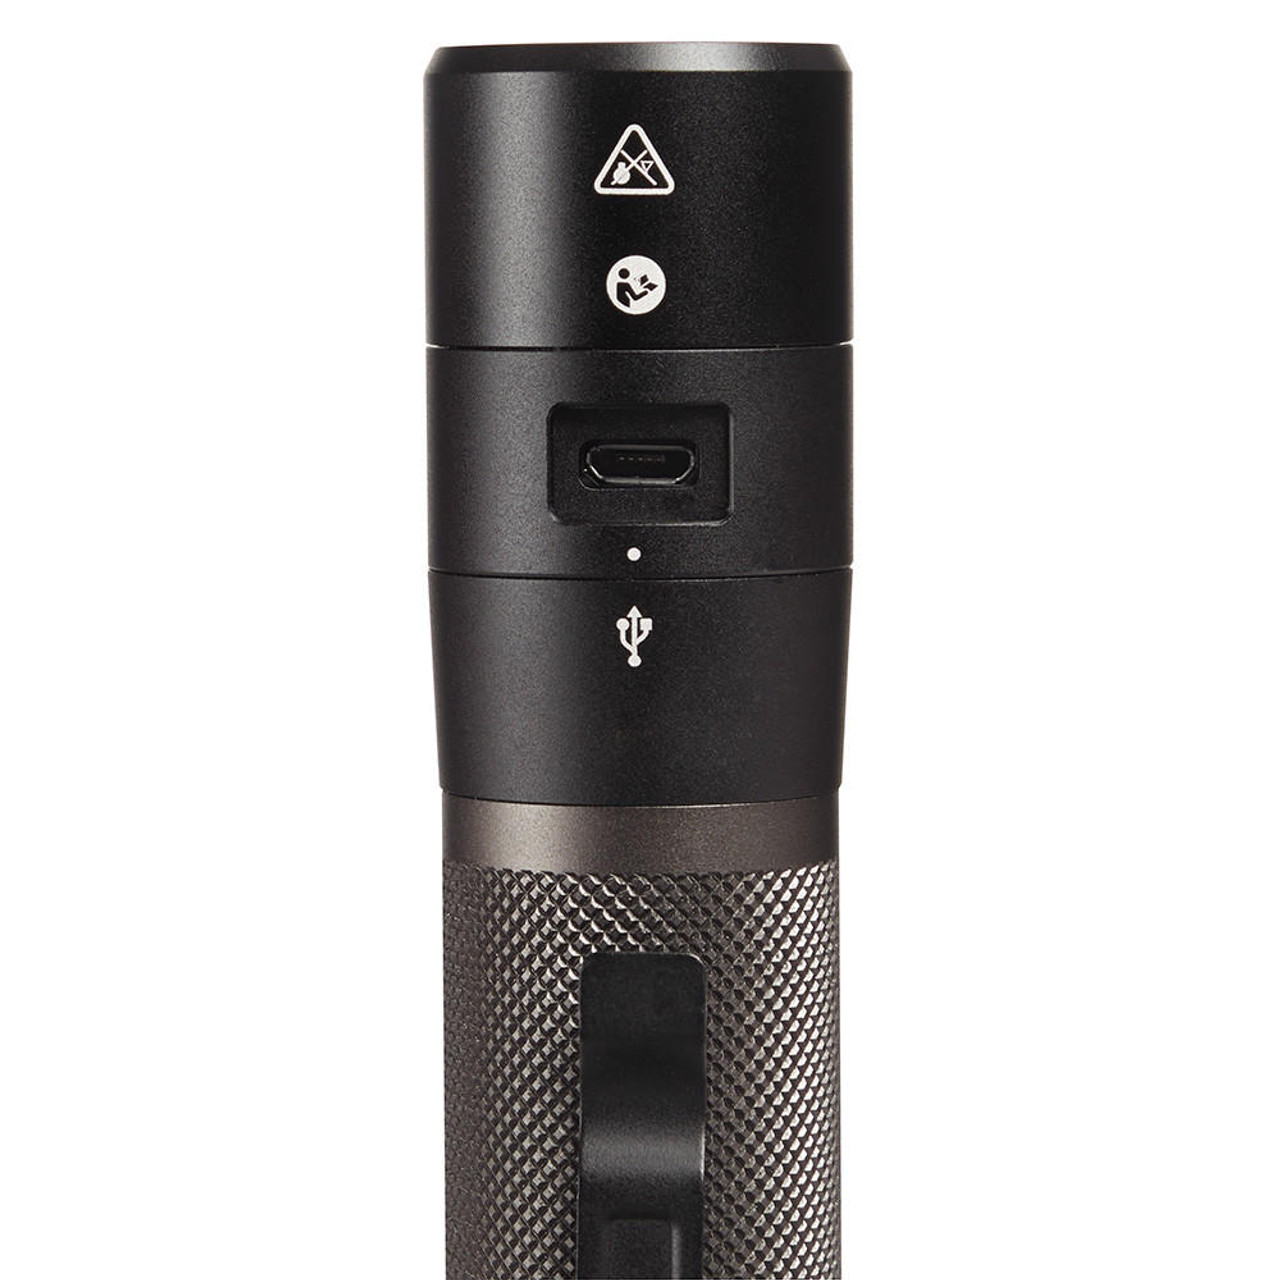  Milwaukee USB Rechargeable 800L Compact Flashlight 2160-21 